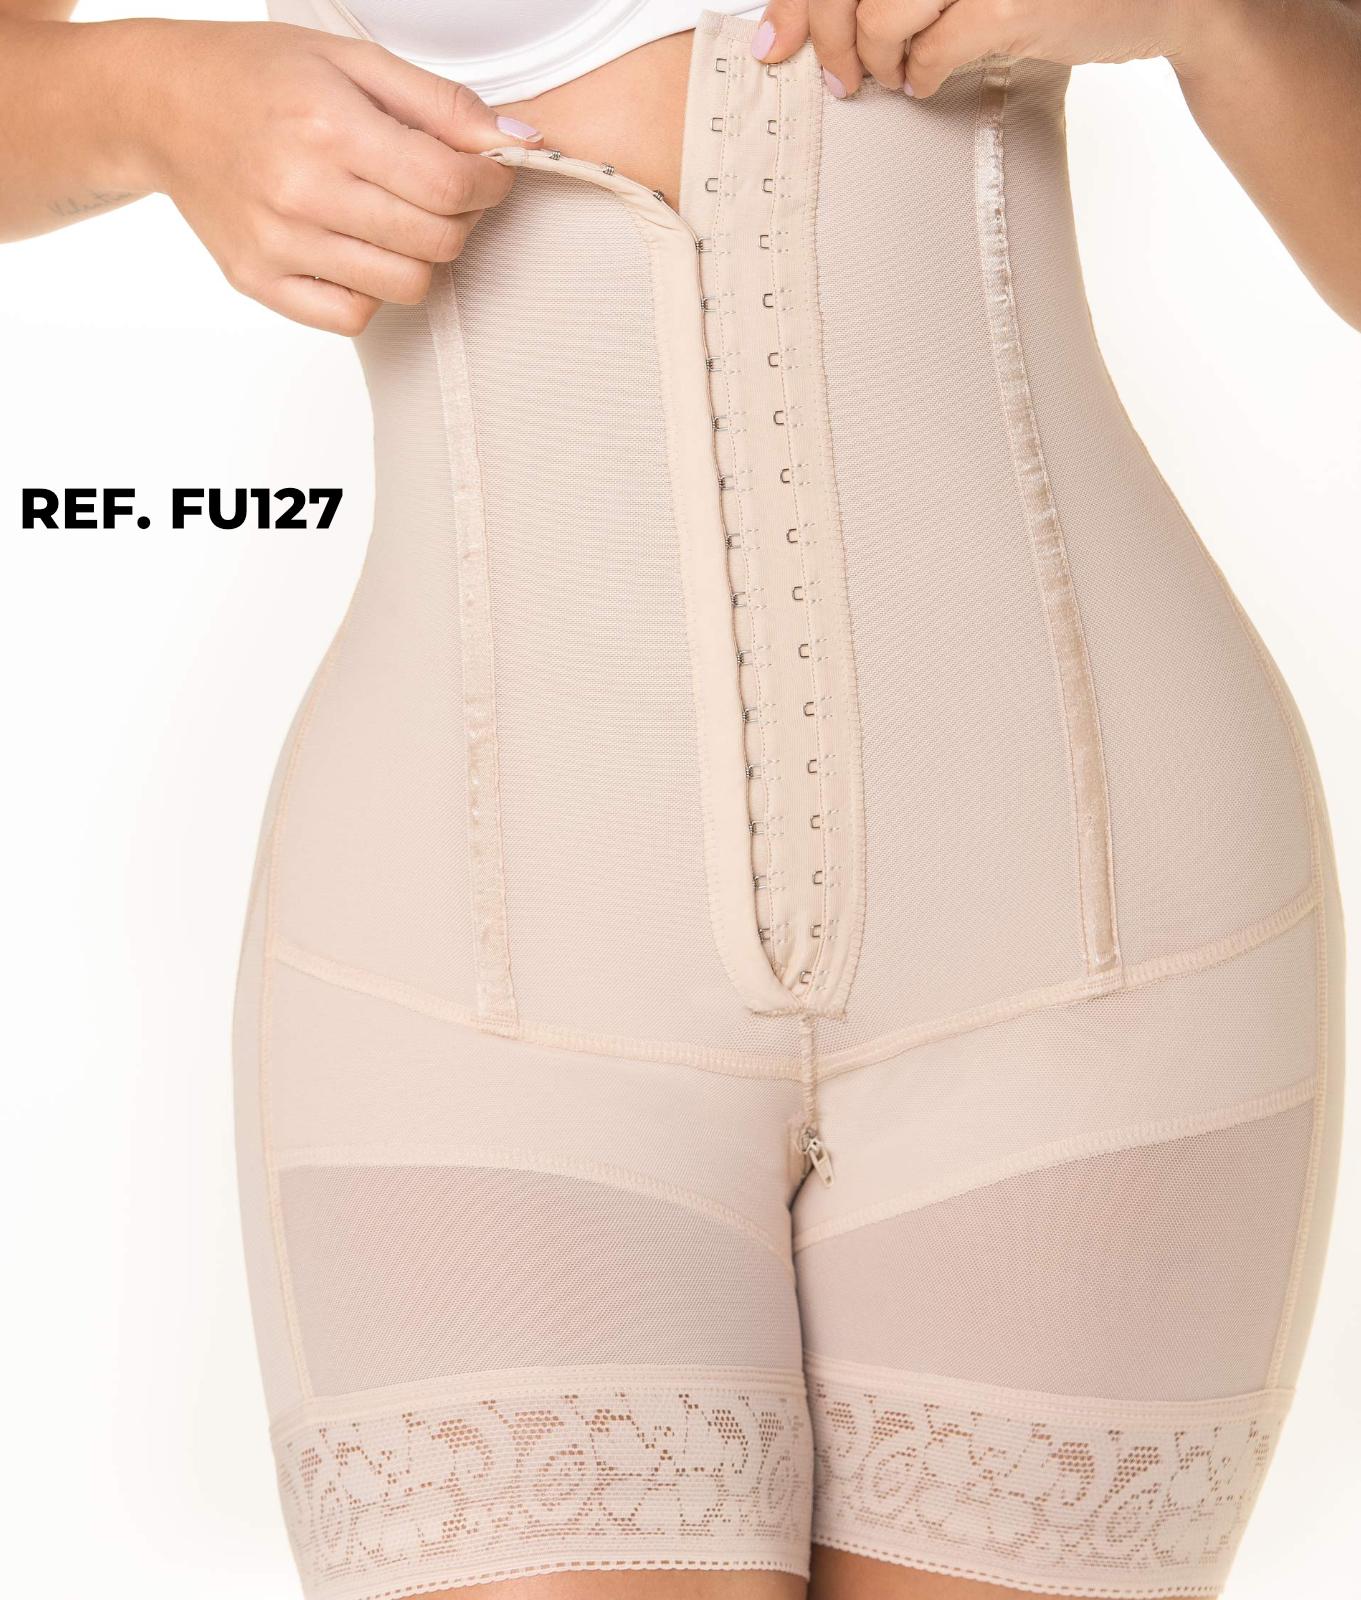 Short Girdle with Powernet Rods